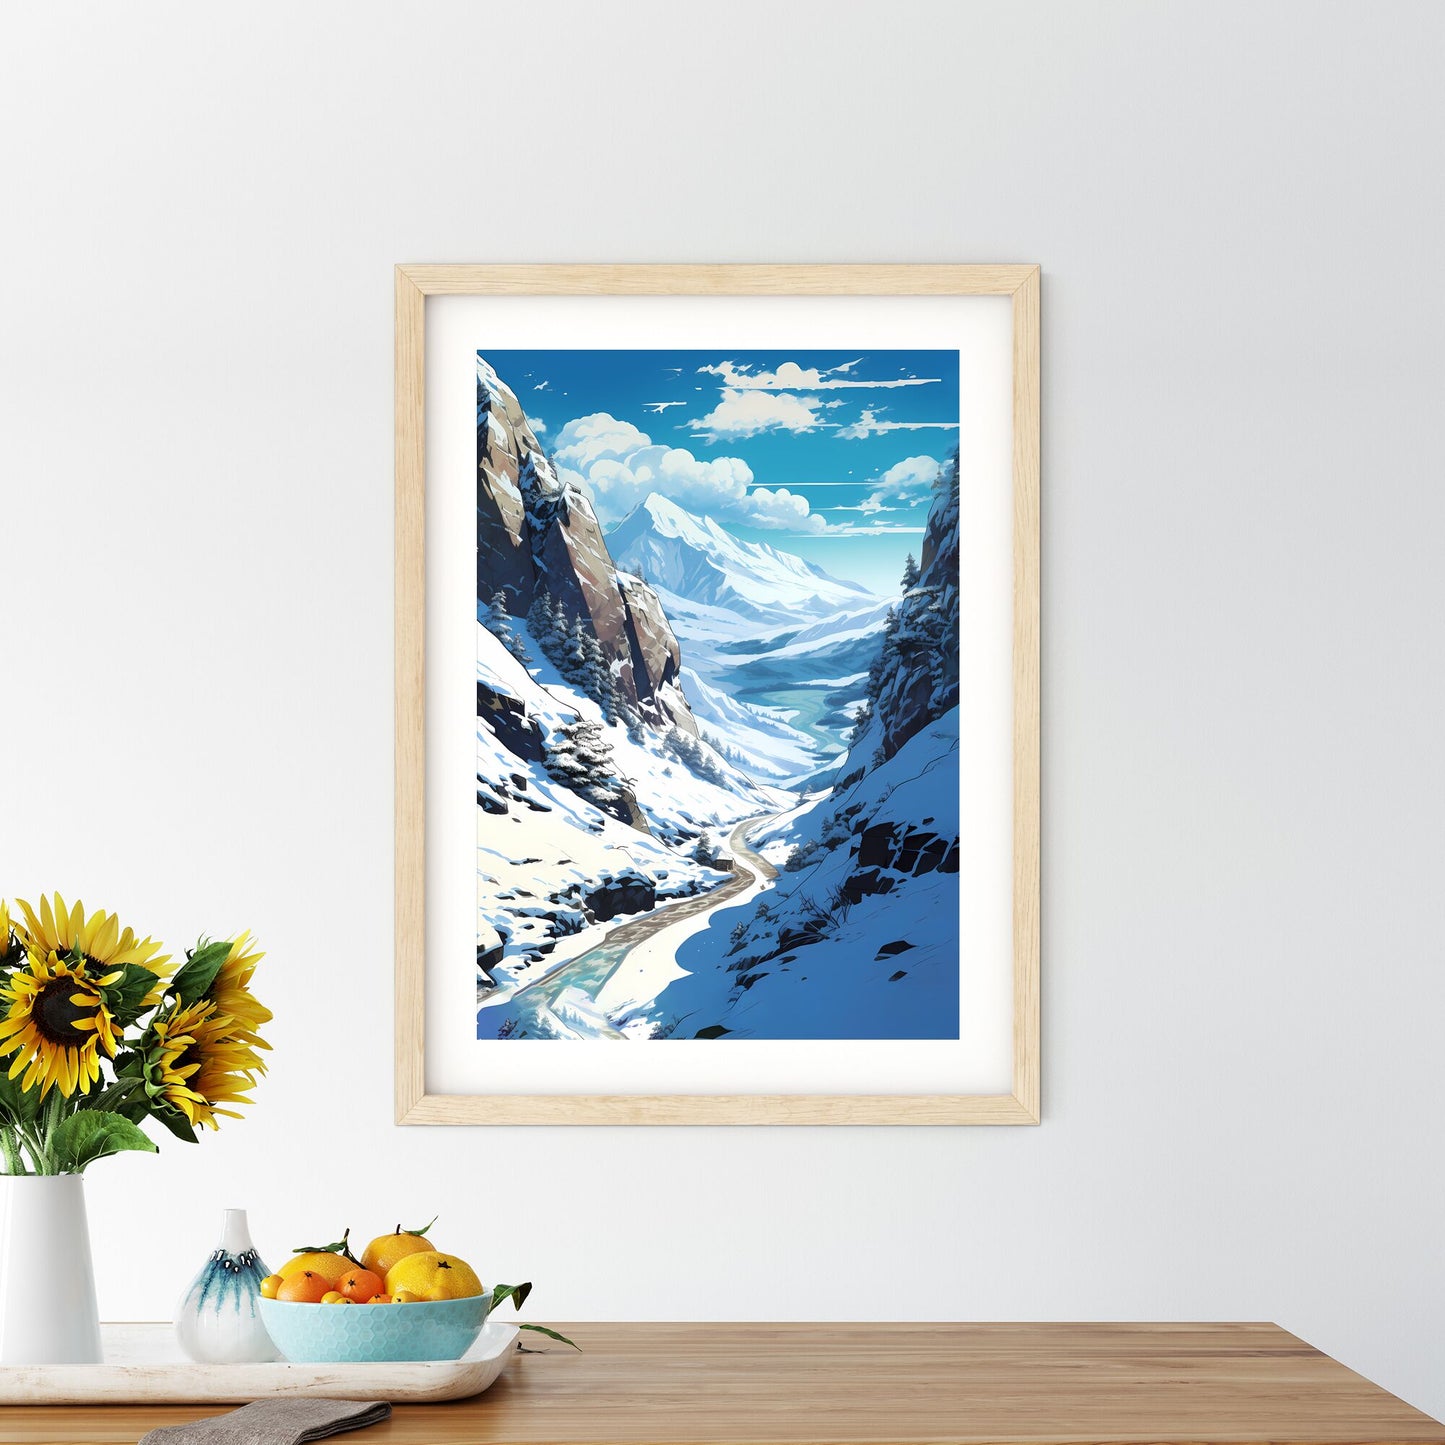 Snowy Mountain Landscape With A River And Trees Art Print Default Title